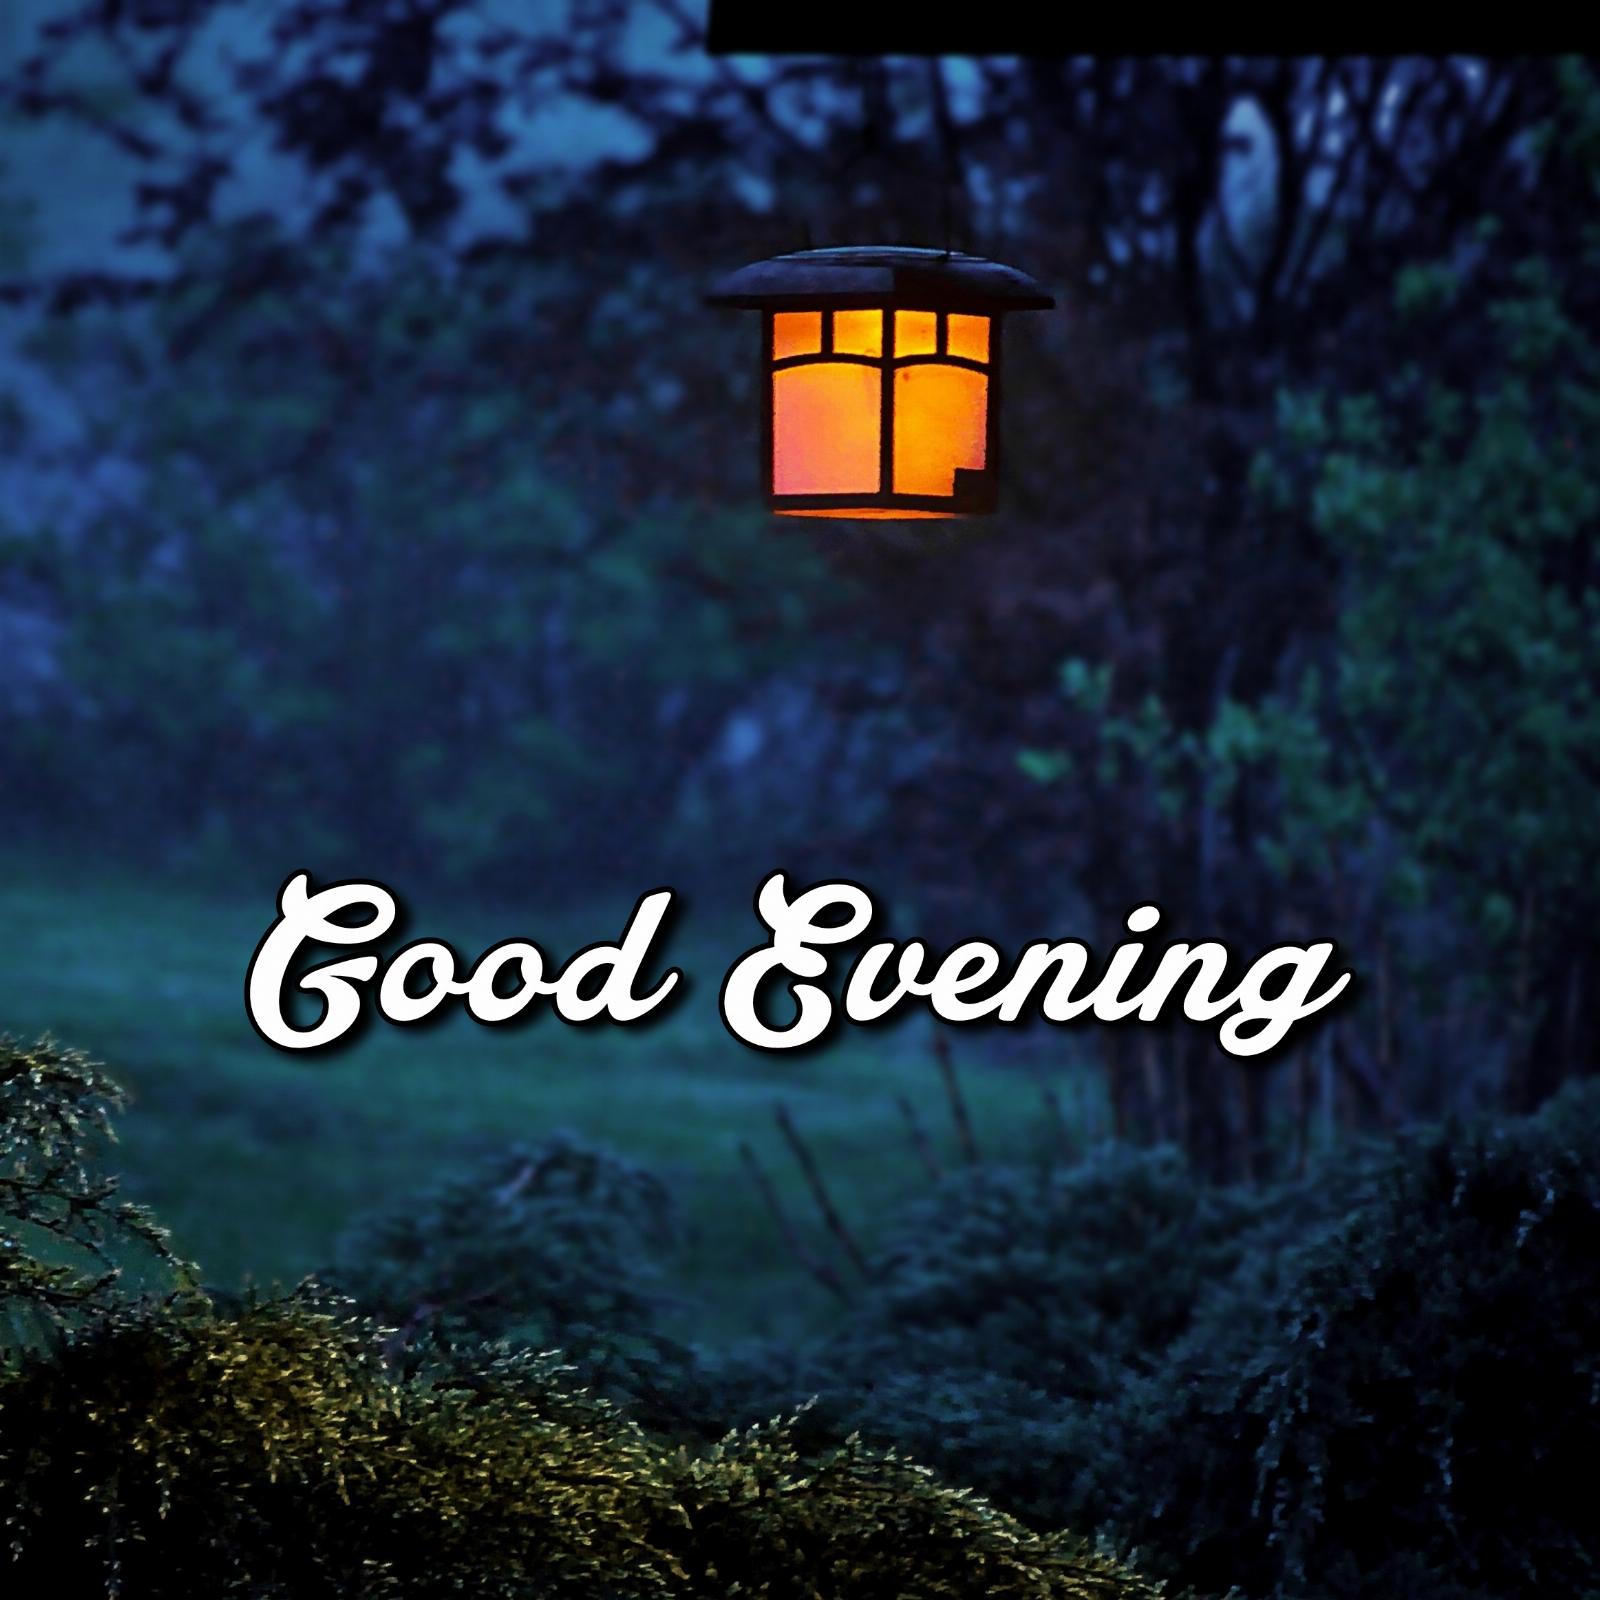 Good Evening Images Hd